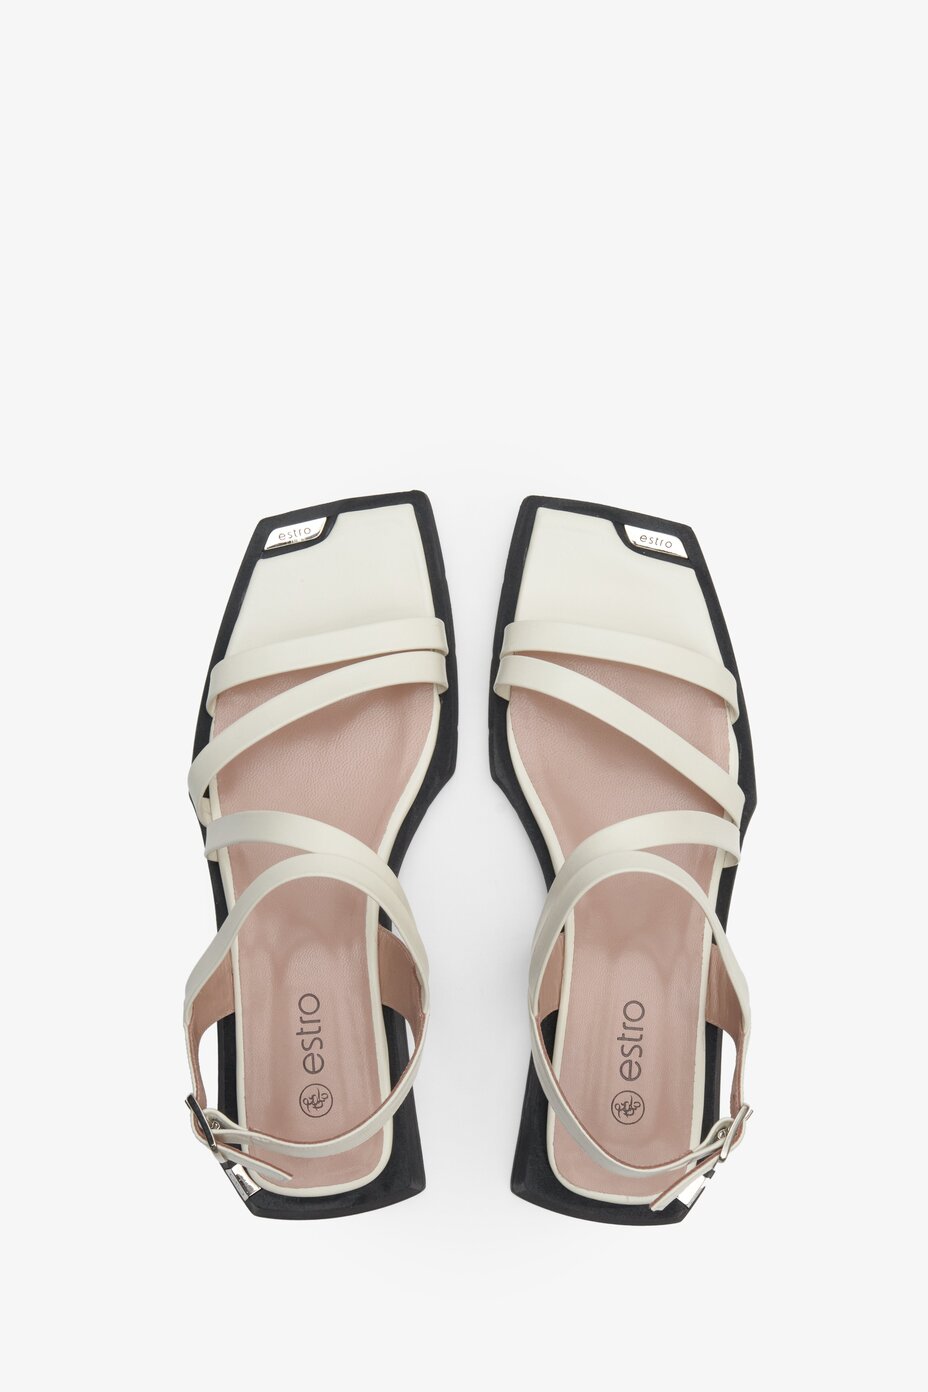 Leather, women's white summer sandals by Estro - presentation of the footwear from the top.